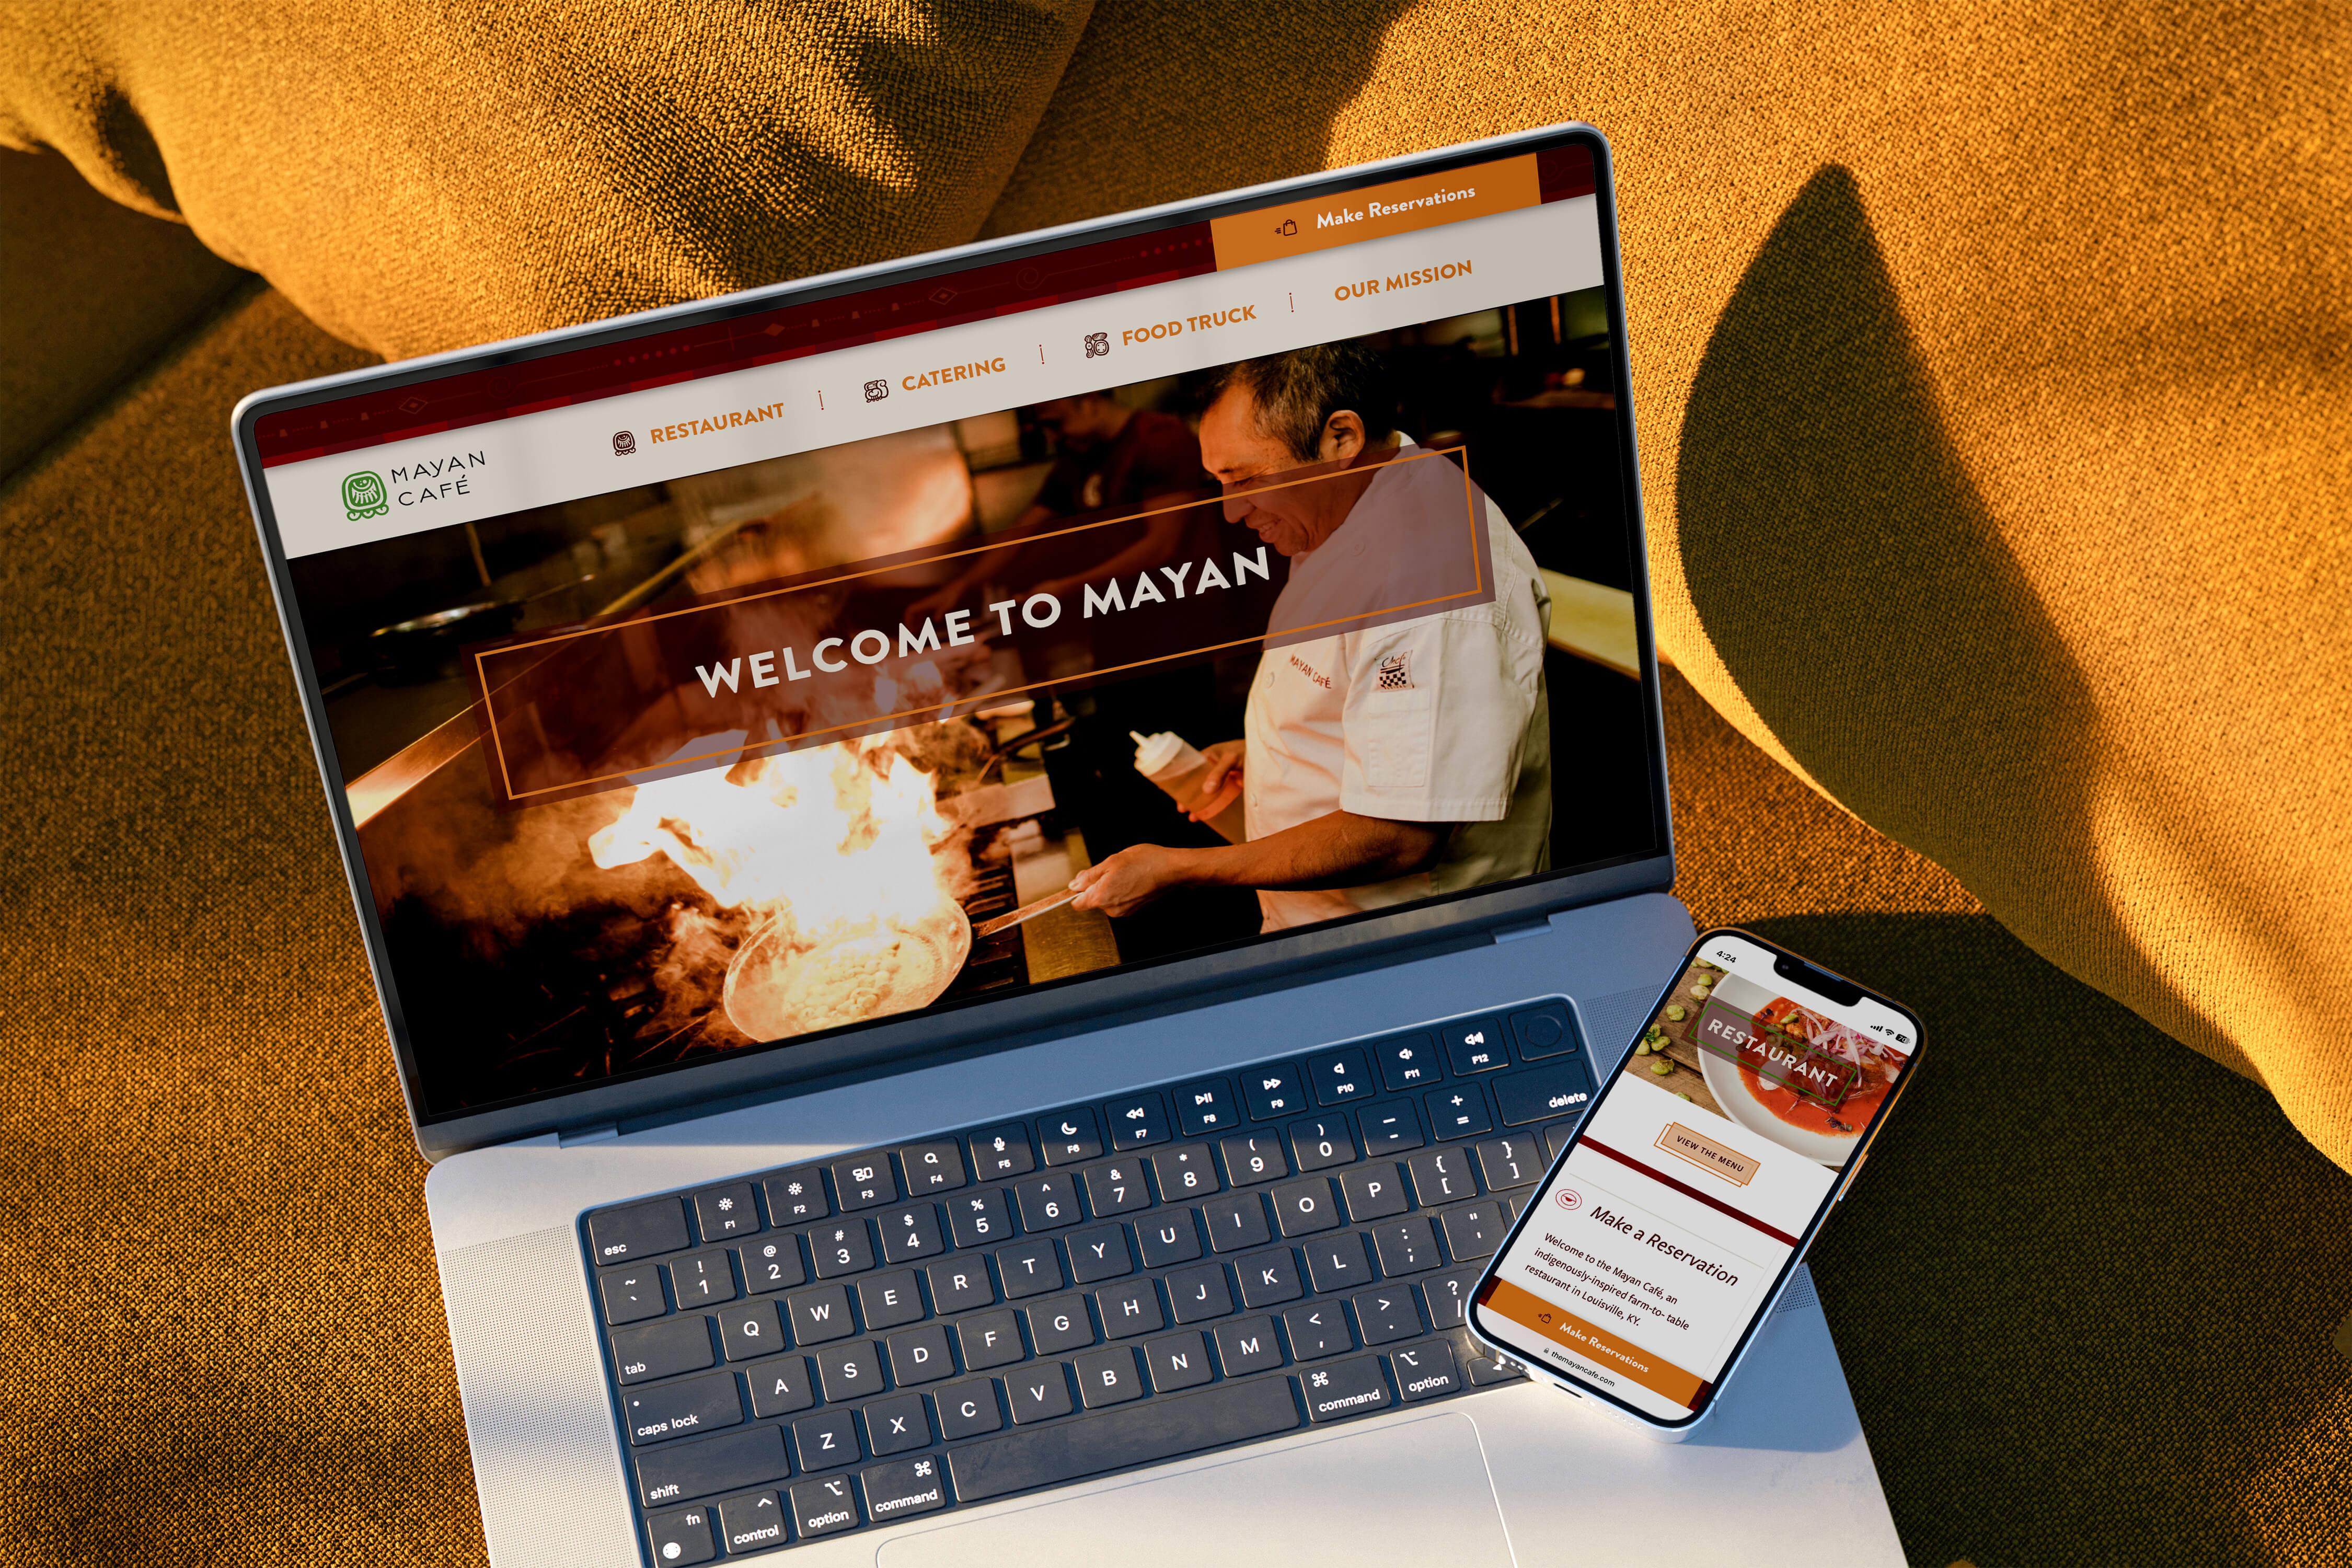 Mayan Cafe website on laptop and mobile.